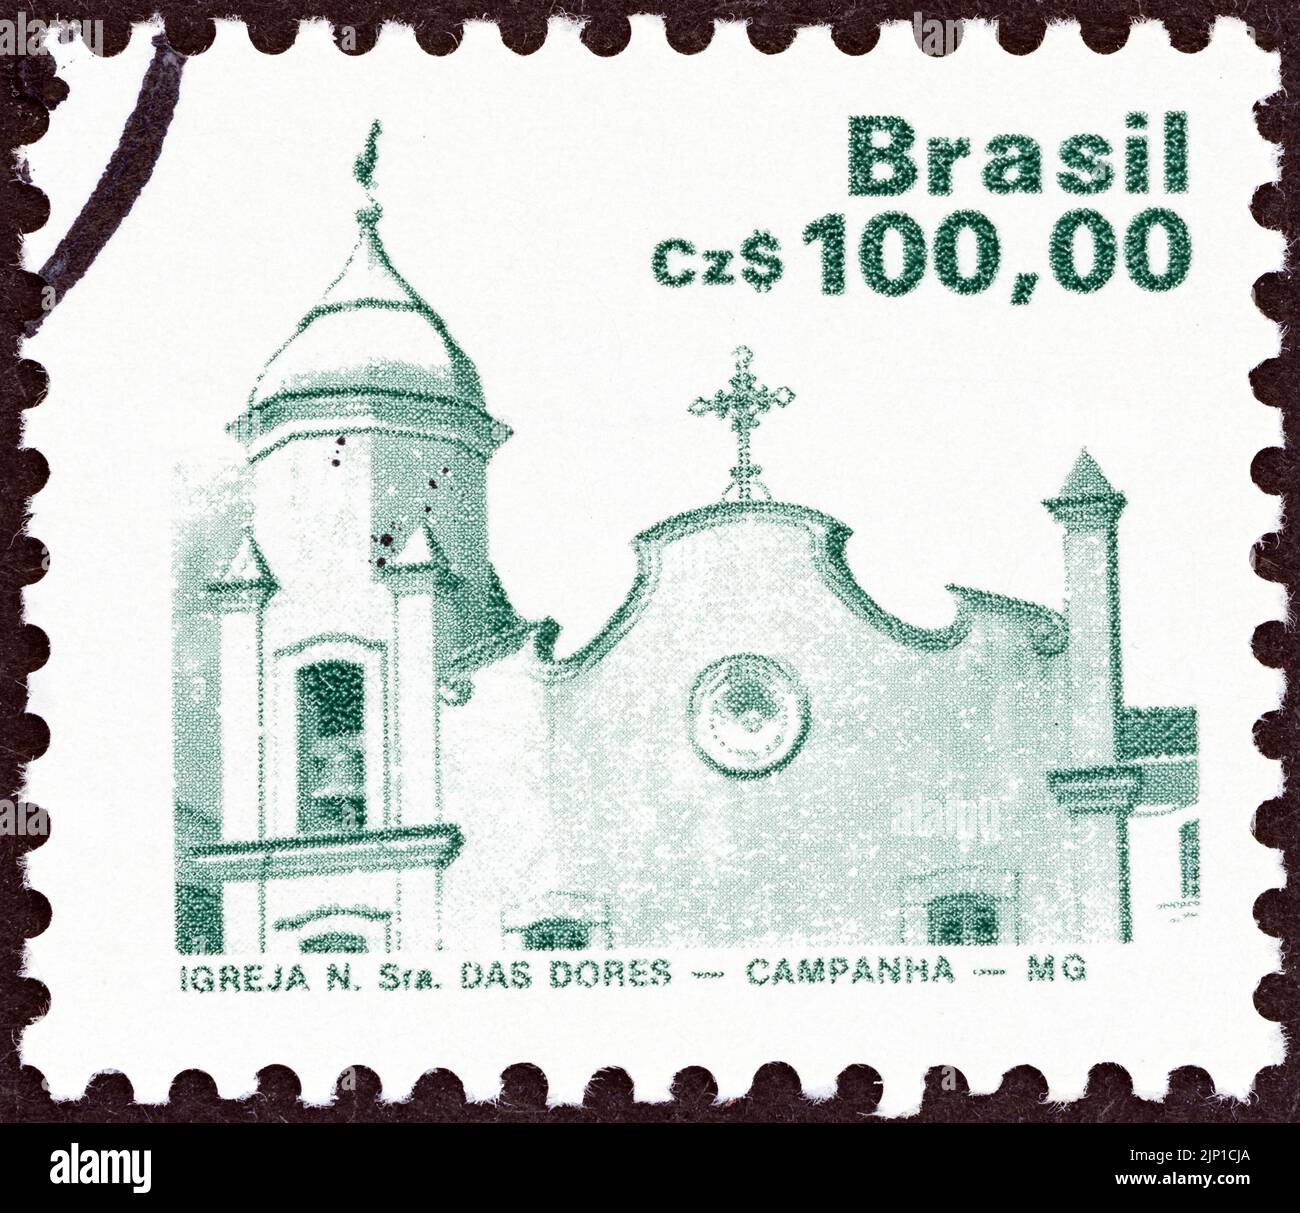 BRAZIL - CIRCA 1986: A stamp printed in Brazil shows Church of Our Lady of Sorrows, Campanha, circa 1986. Stock Photo